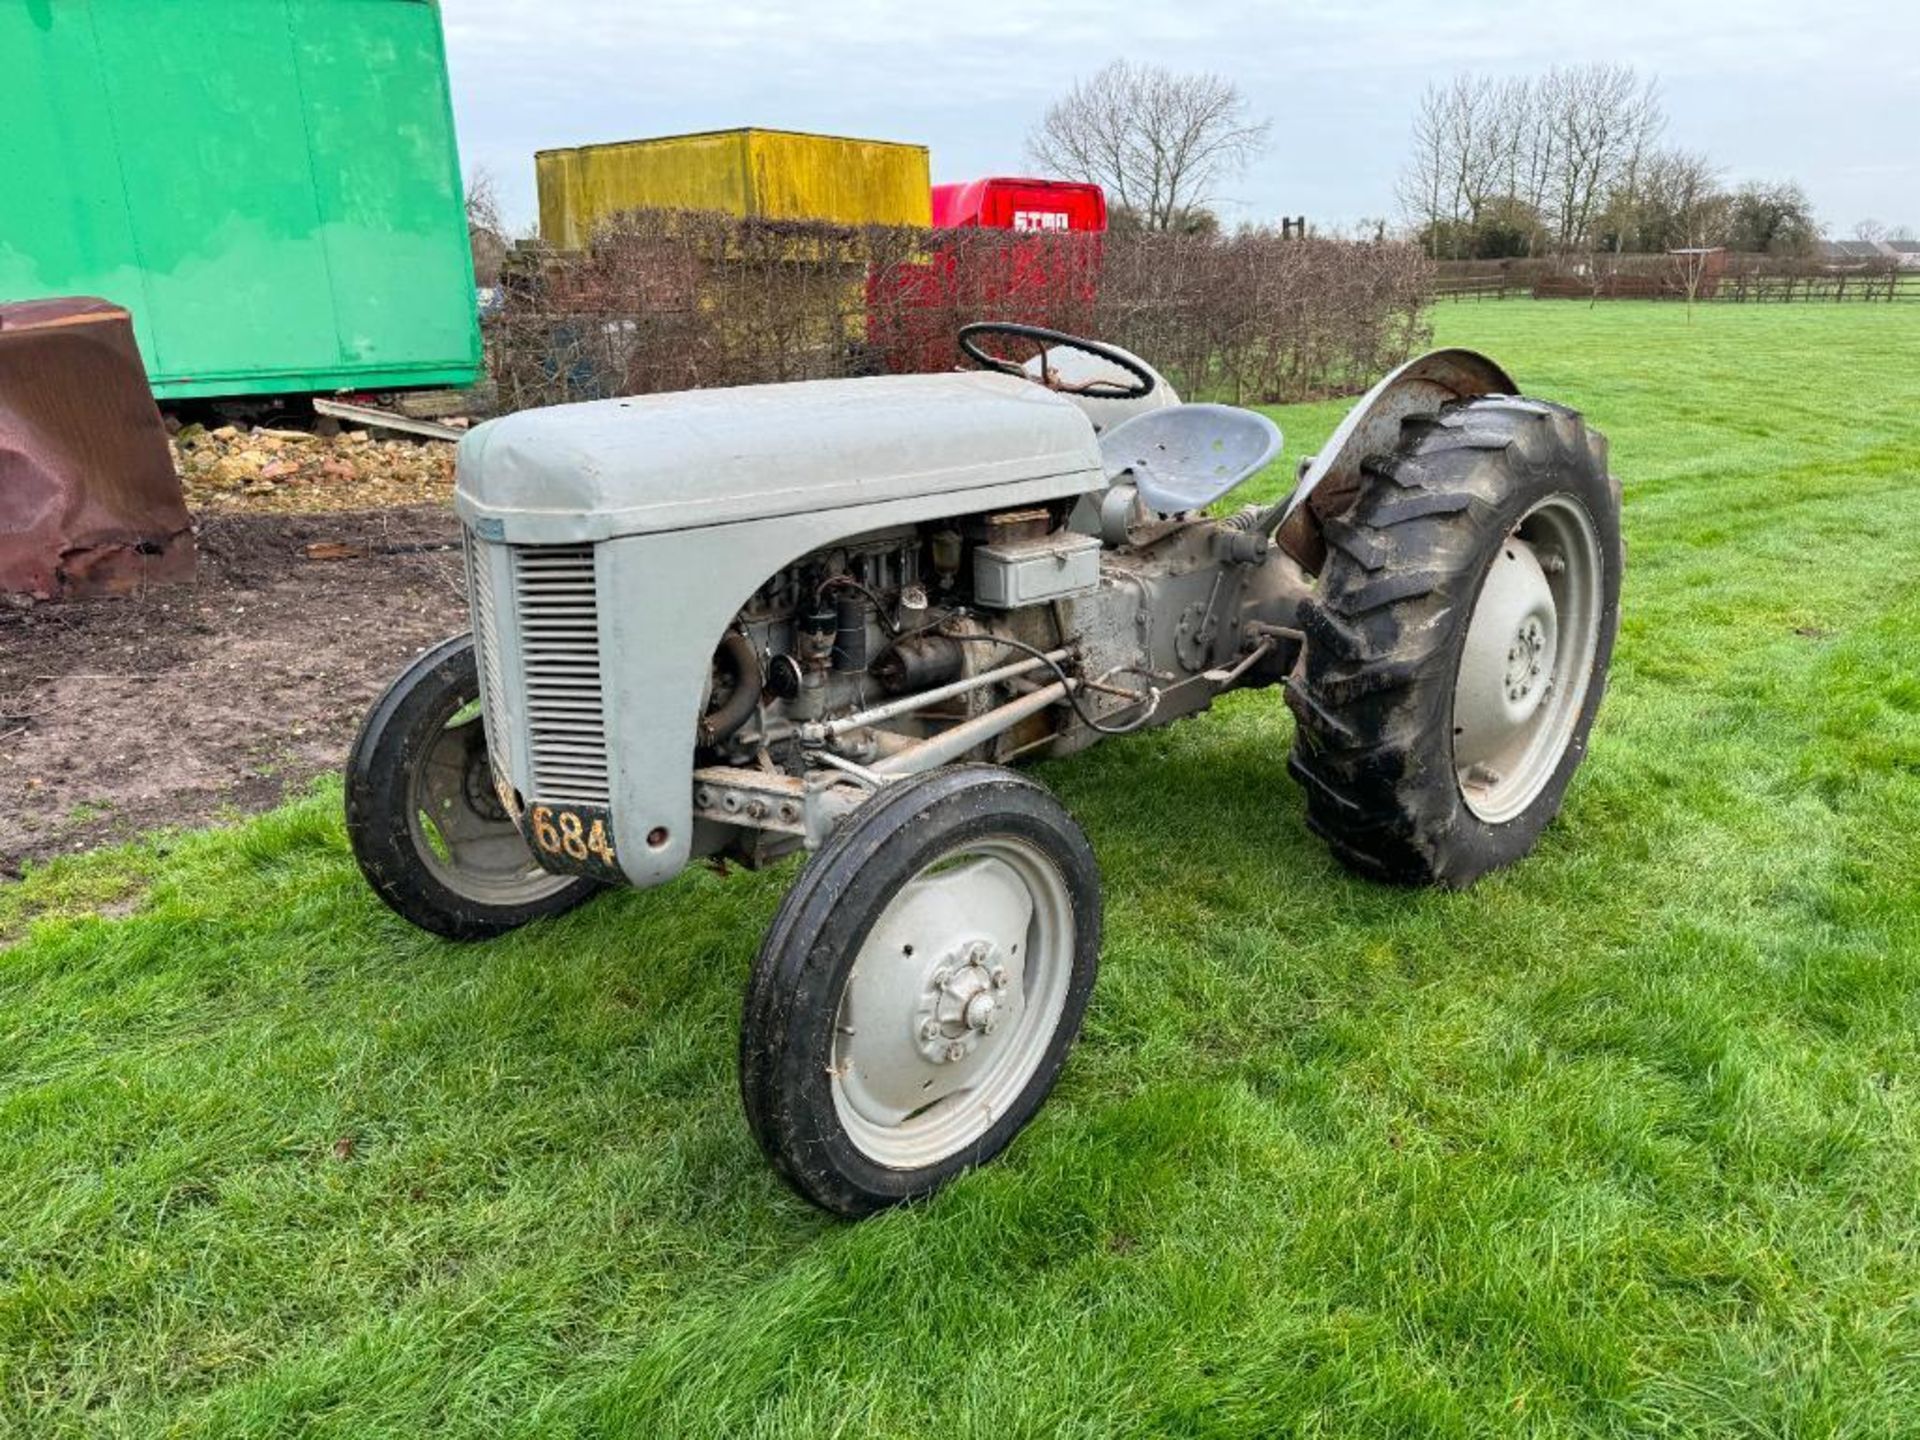 1955 Ferguson TED 2wd petrol paraffin tractor with underslung exhaust and linkage on 12.4-28 rear an - Image 3 of 11